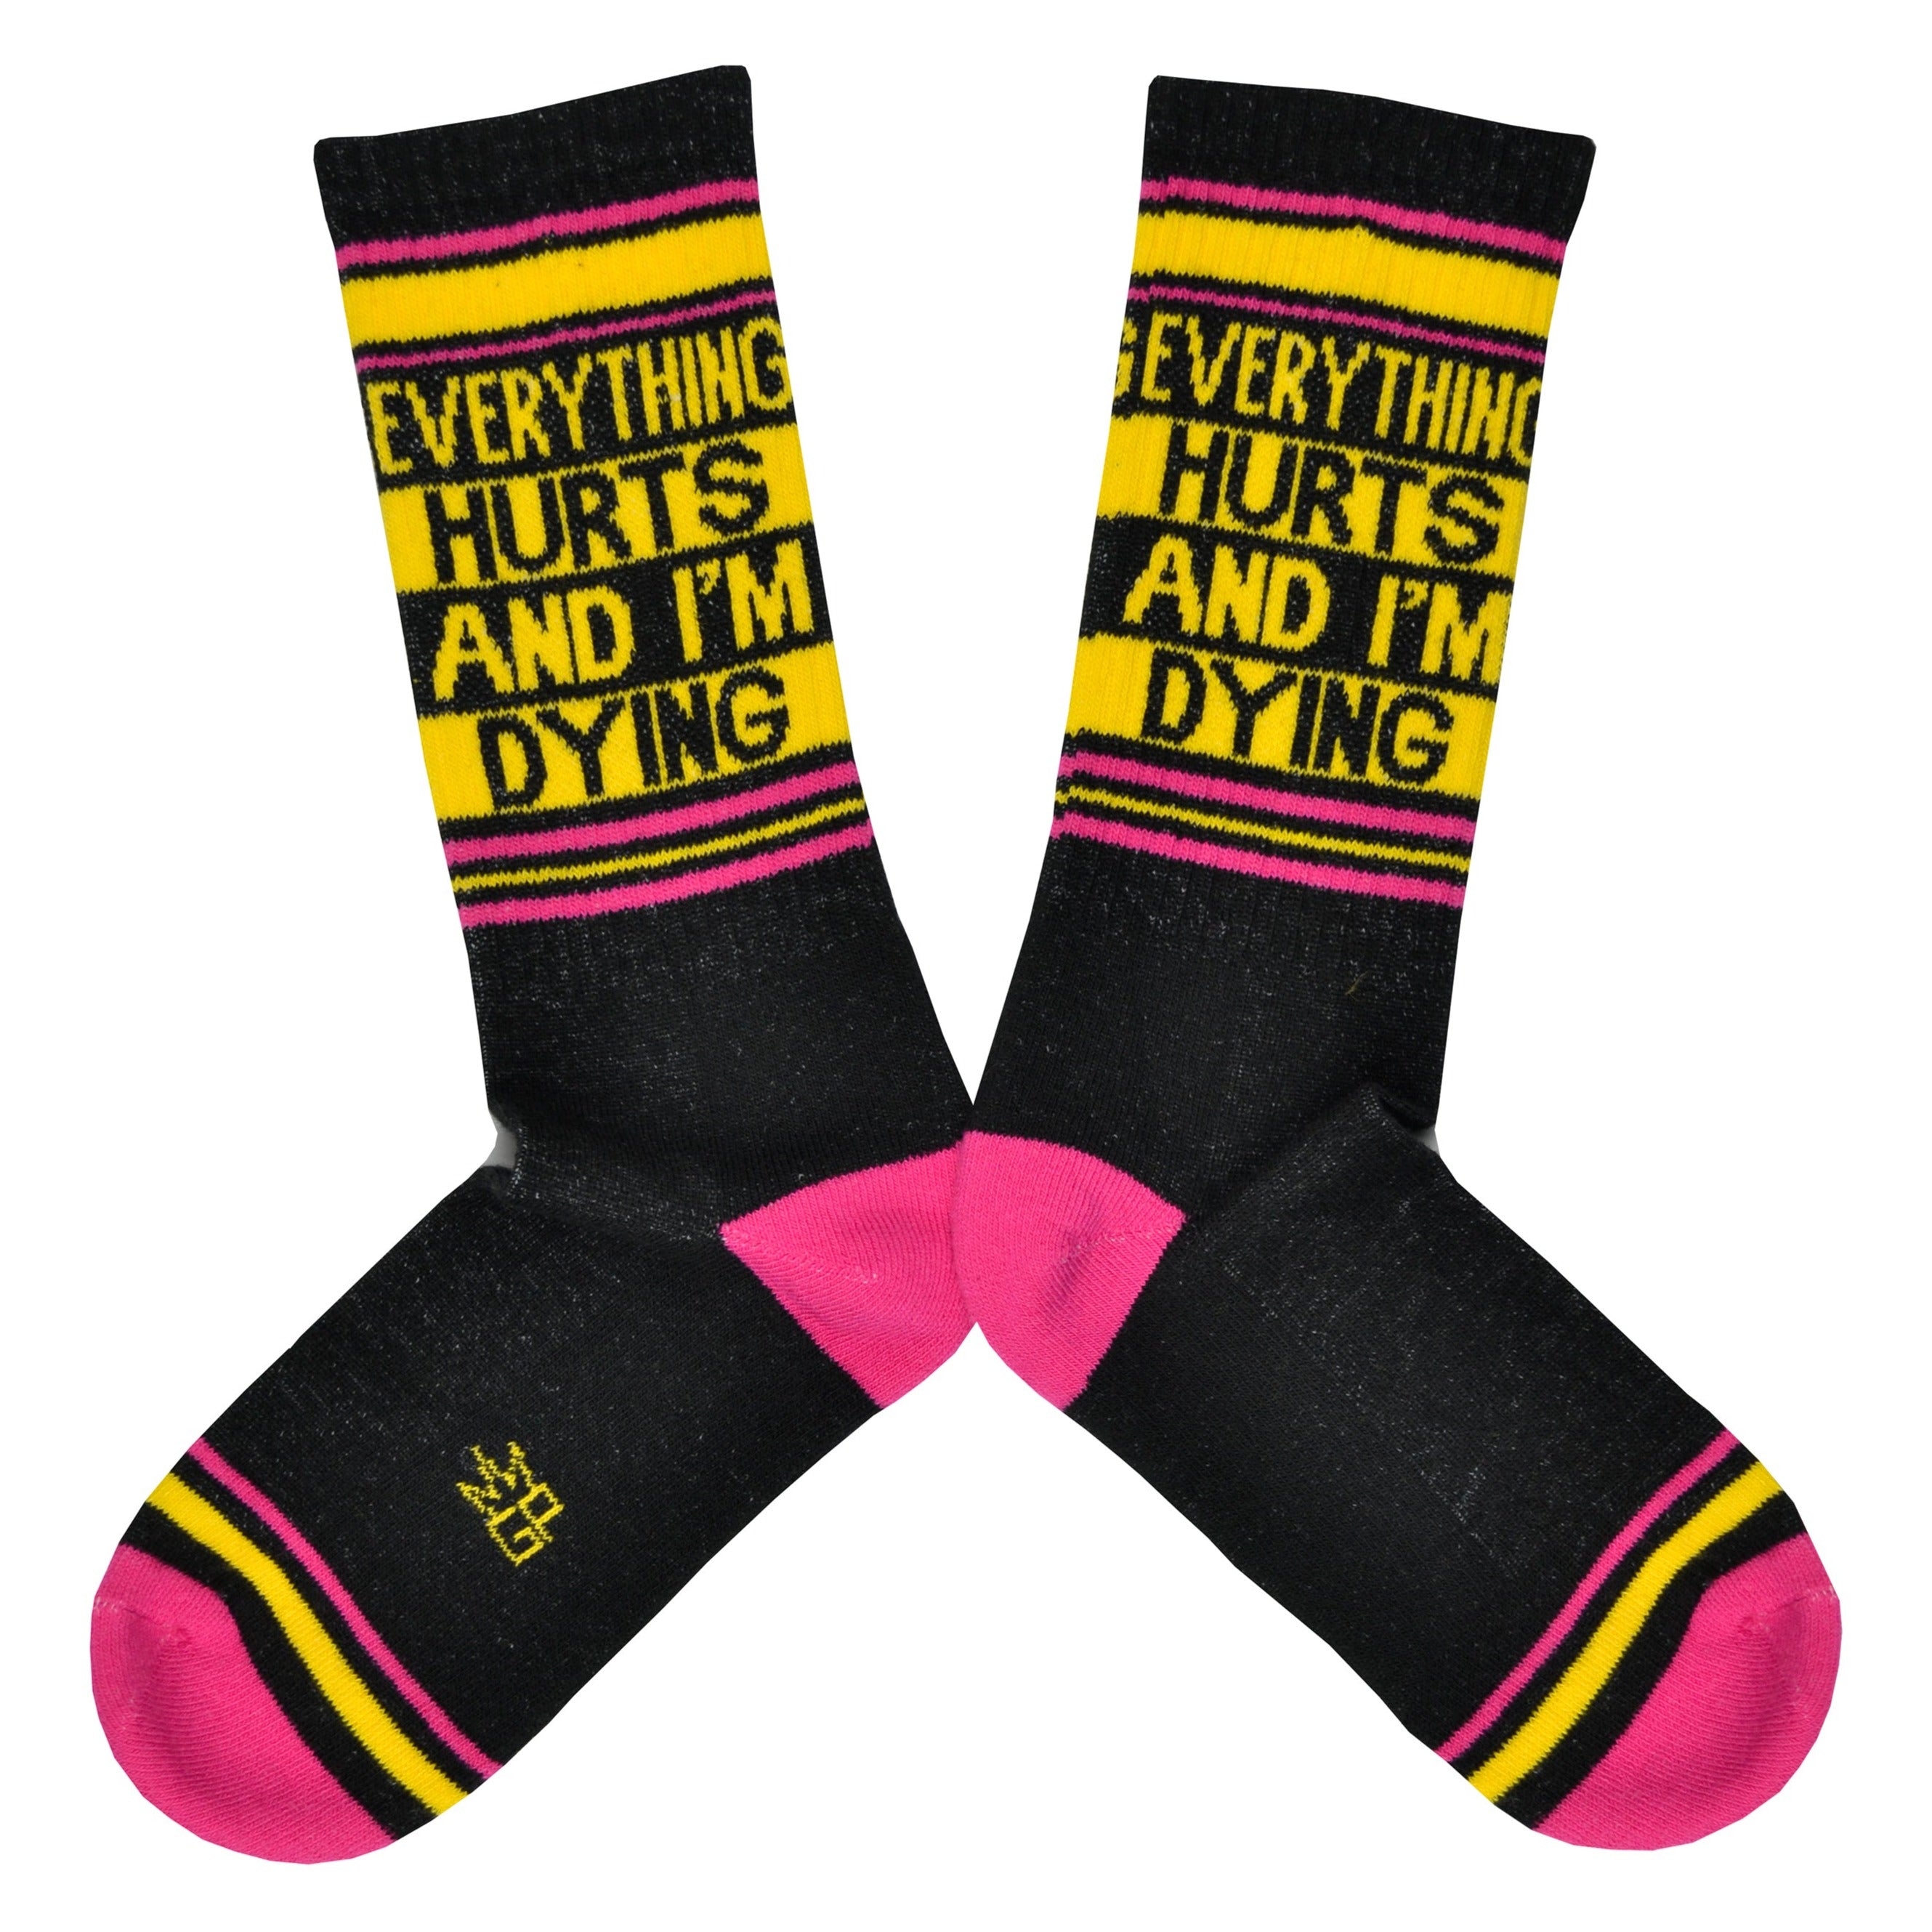 Shown in a flatlay, a pair of Gumball Poodle black cotton crew socks with pink toe/heel and yellow “Everything Hurts and I’m Dying” text